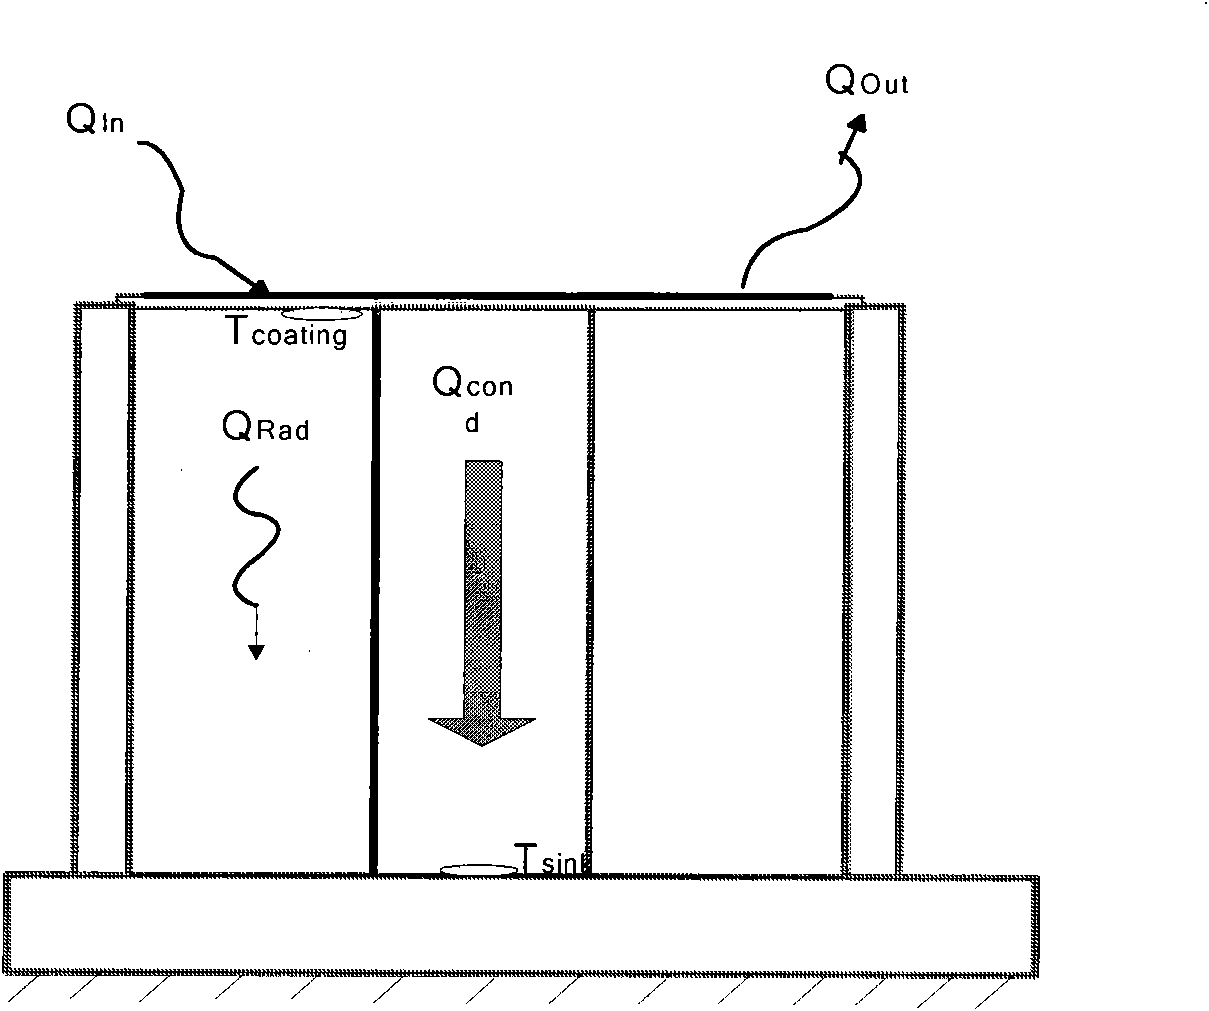 Measuring method of solar absorptance of thermal control coating